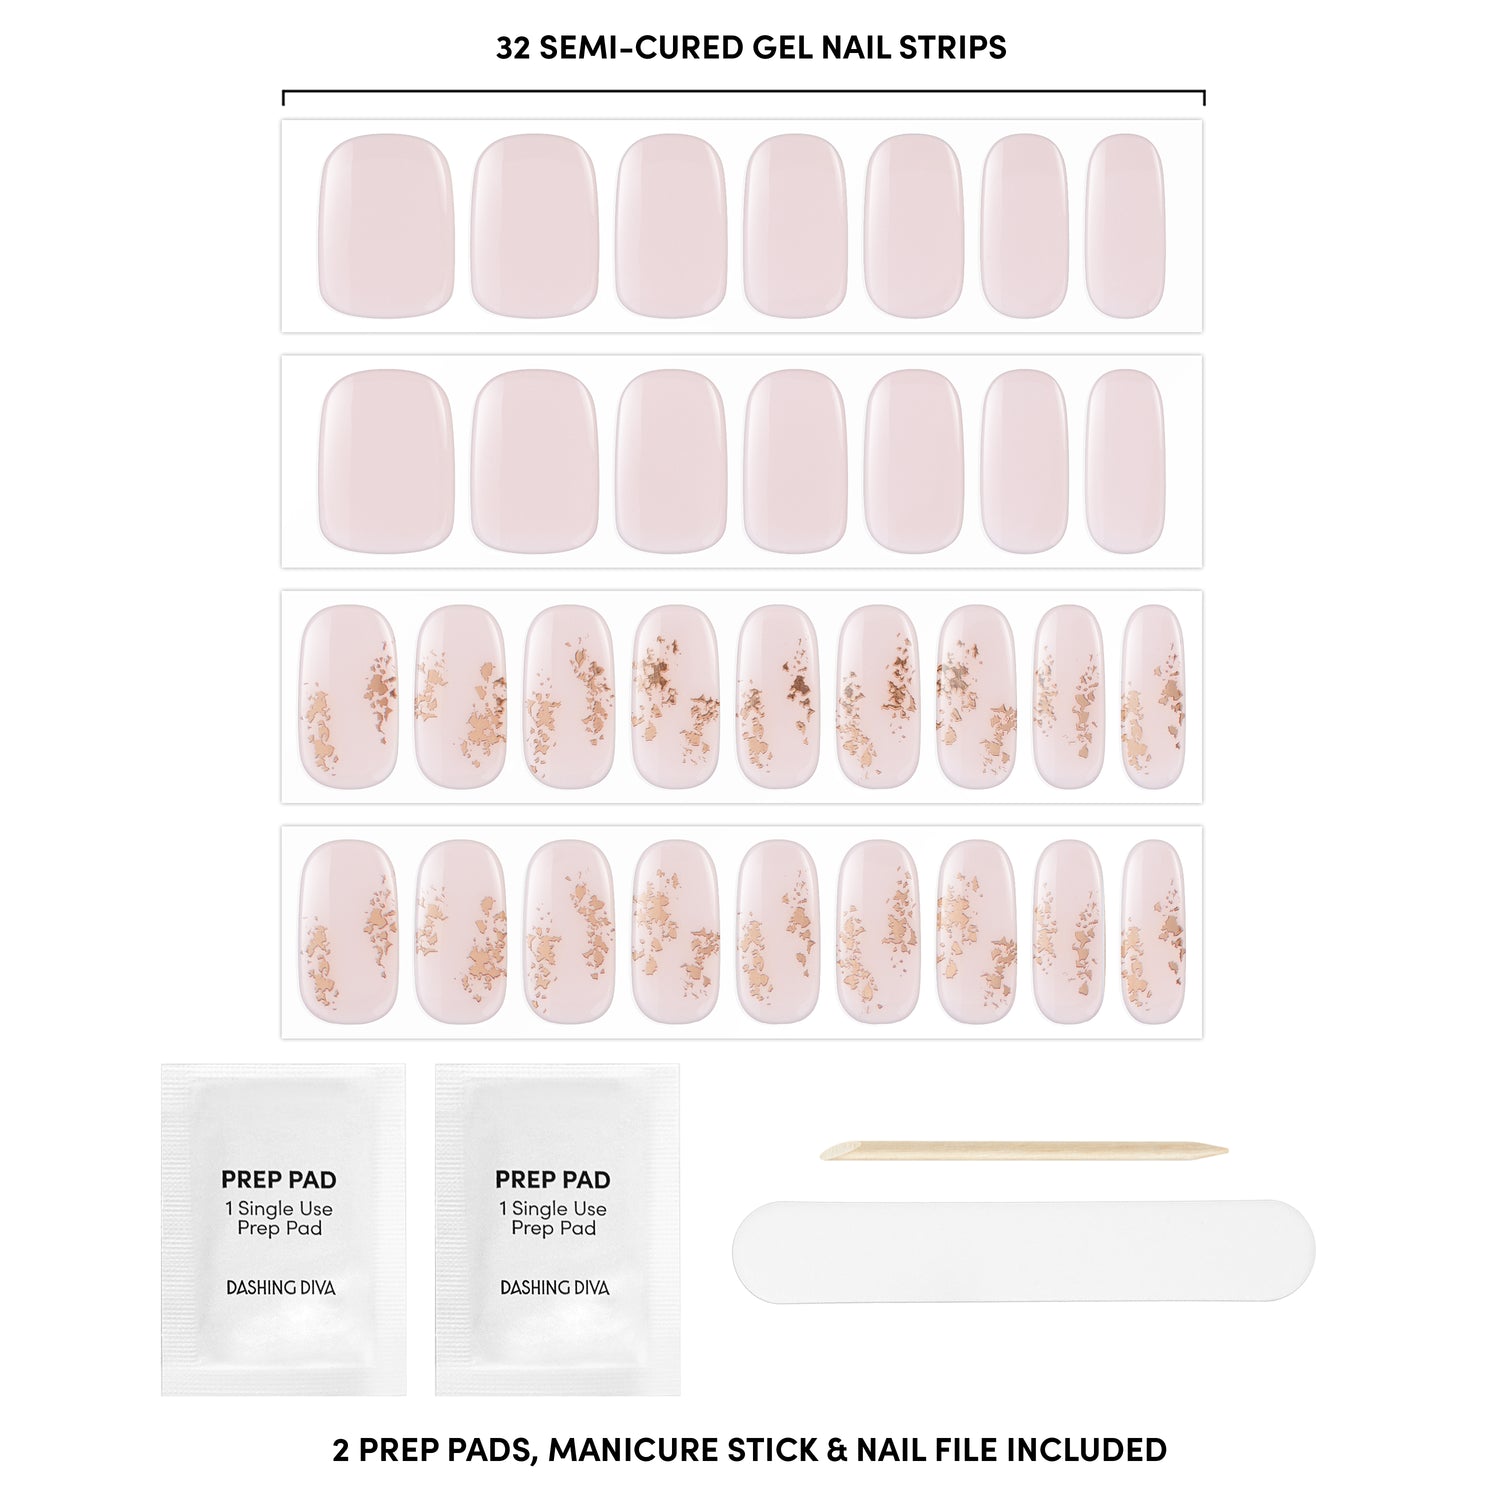 Semi-cured ultra baby pink gel nail strips featuring gold foil accents with mega volume and maximum shine.